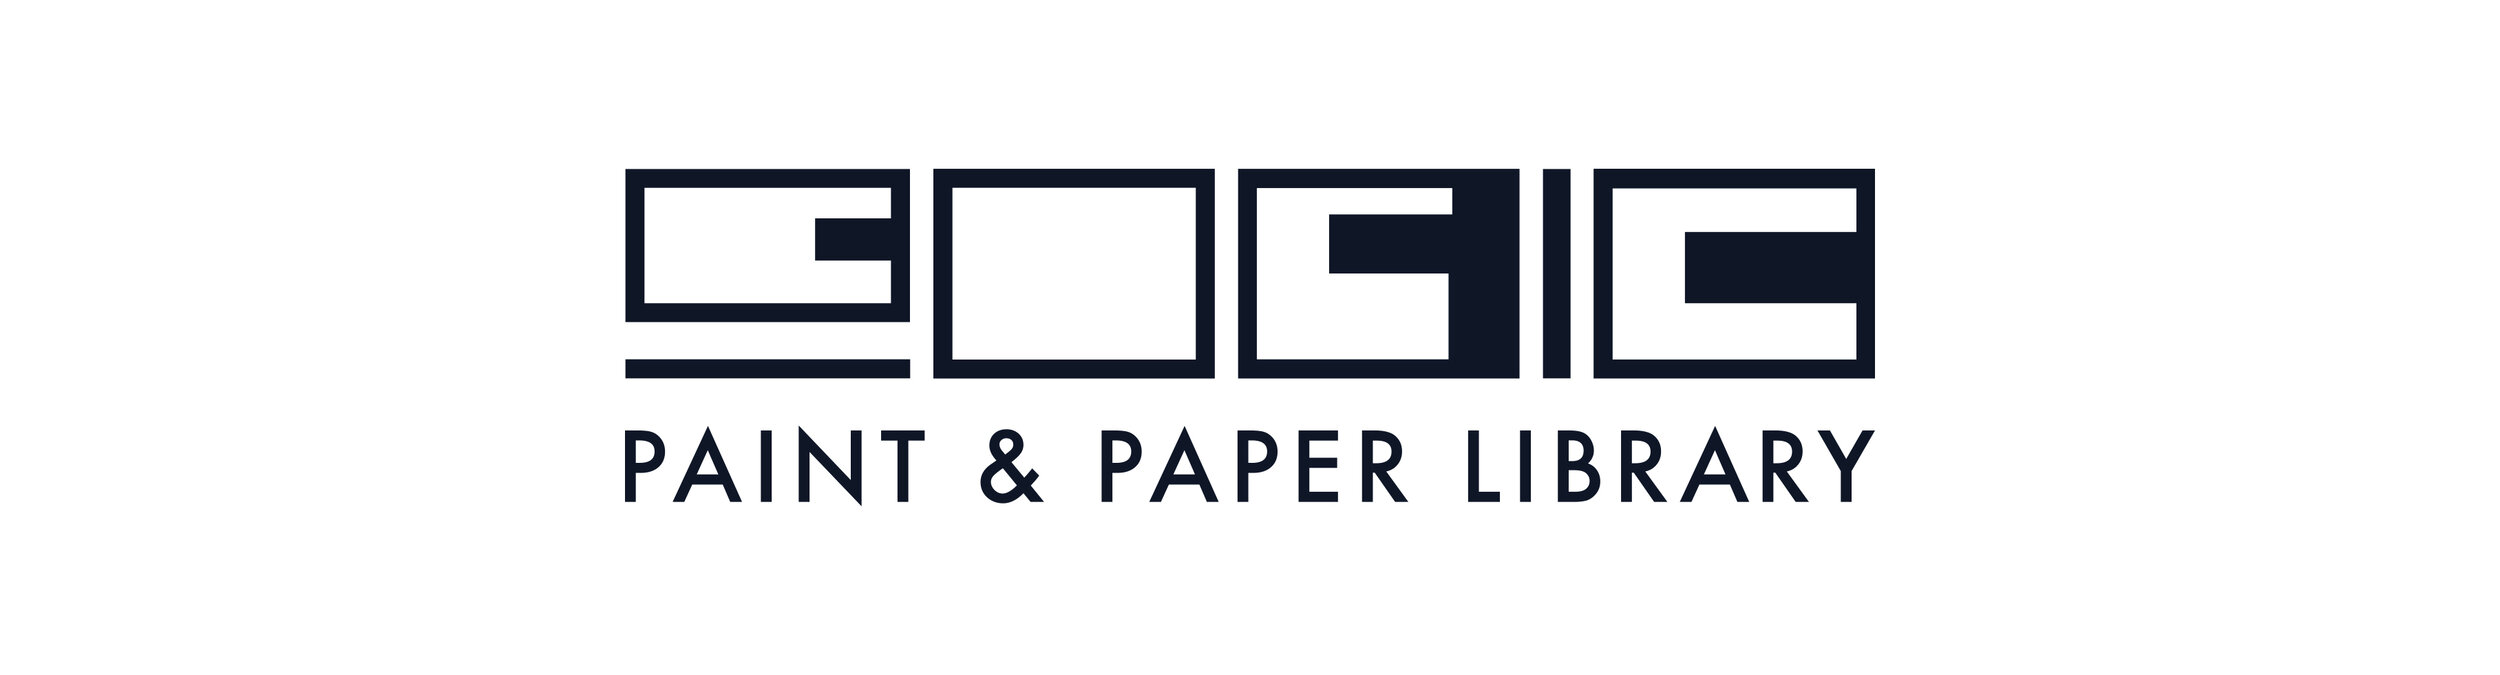 Paint & Paper Library.jpg